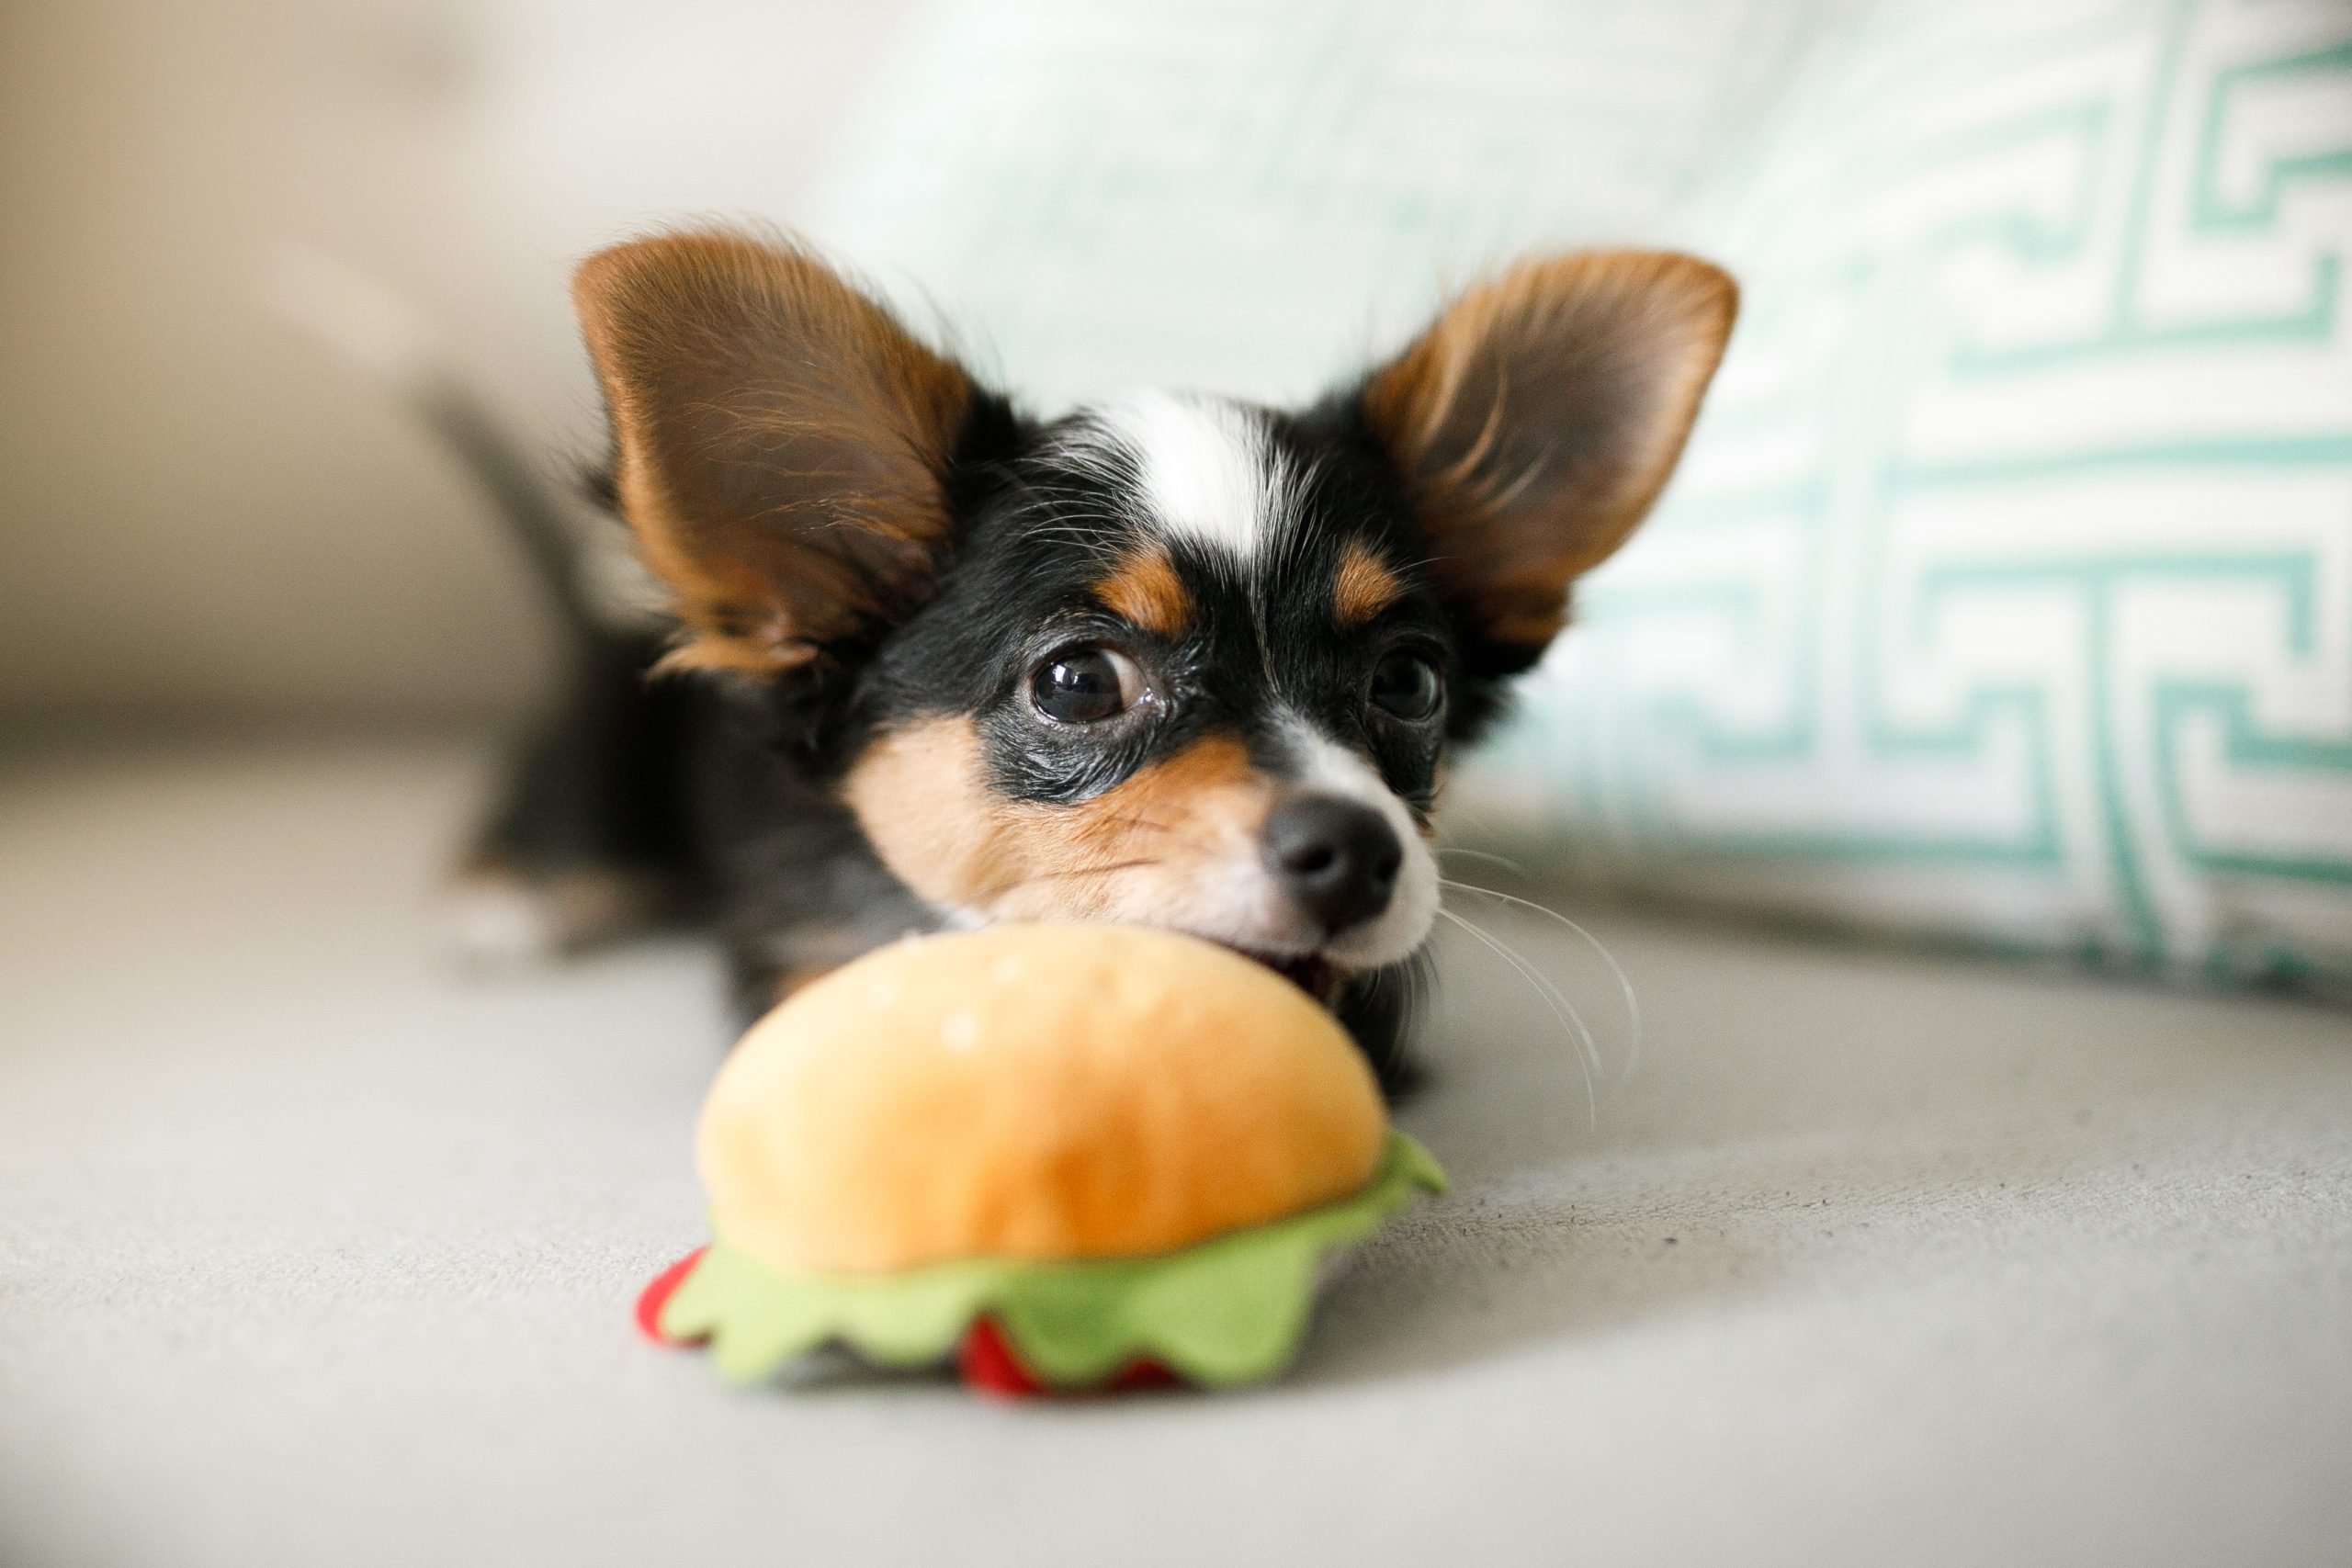 Chihuahua puppy playing with sandwich toy